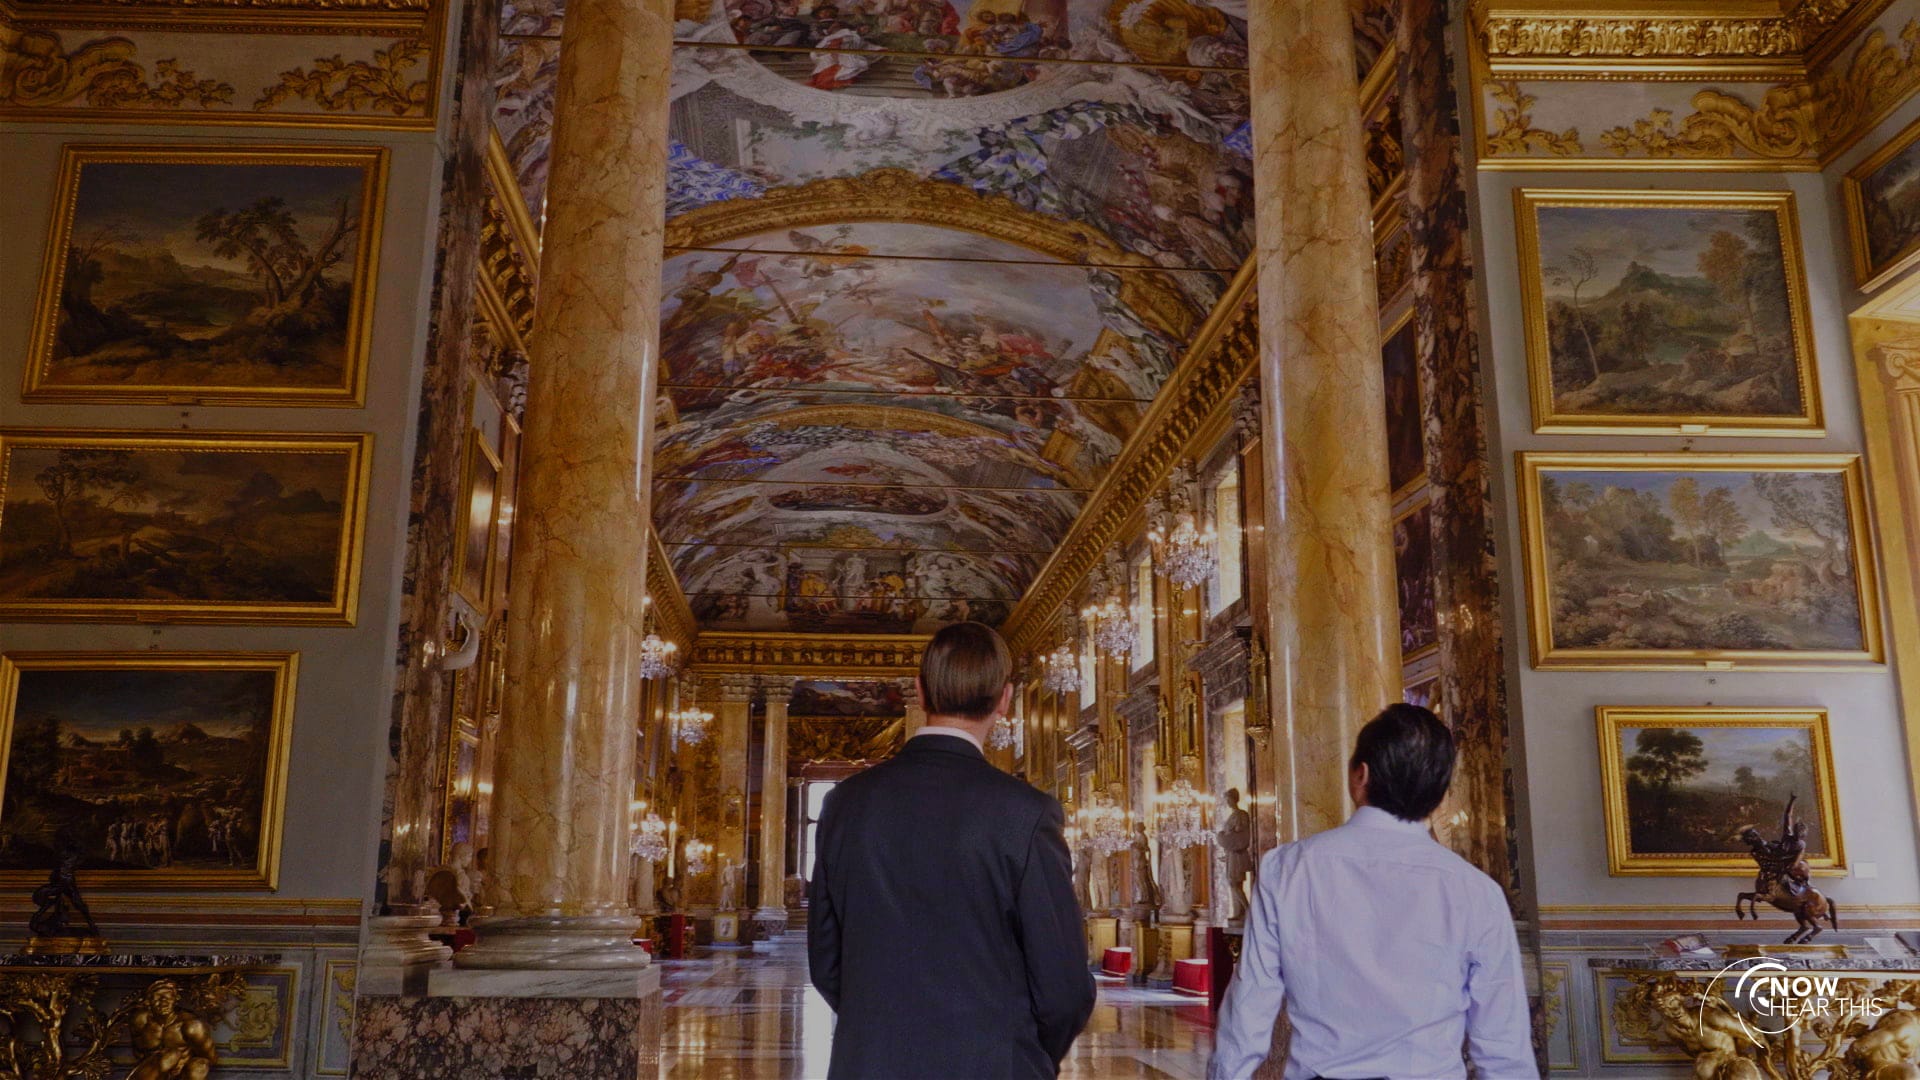 Scott looking at a Baroque interior with paintings